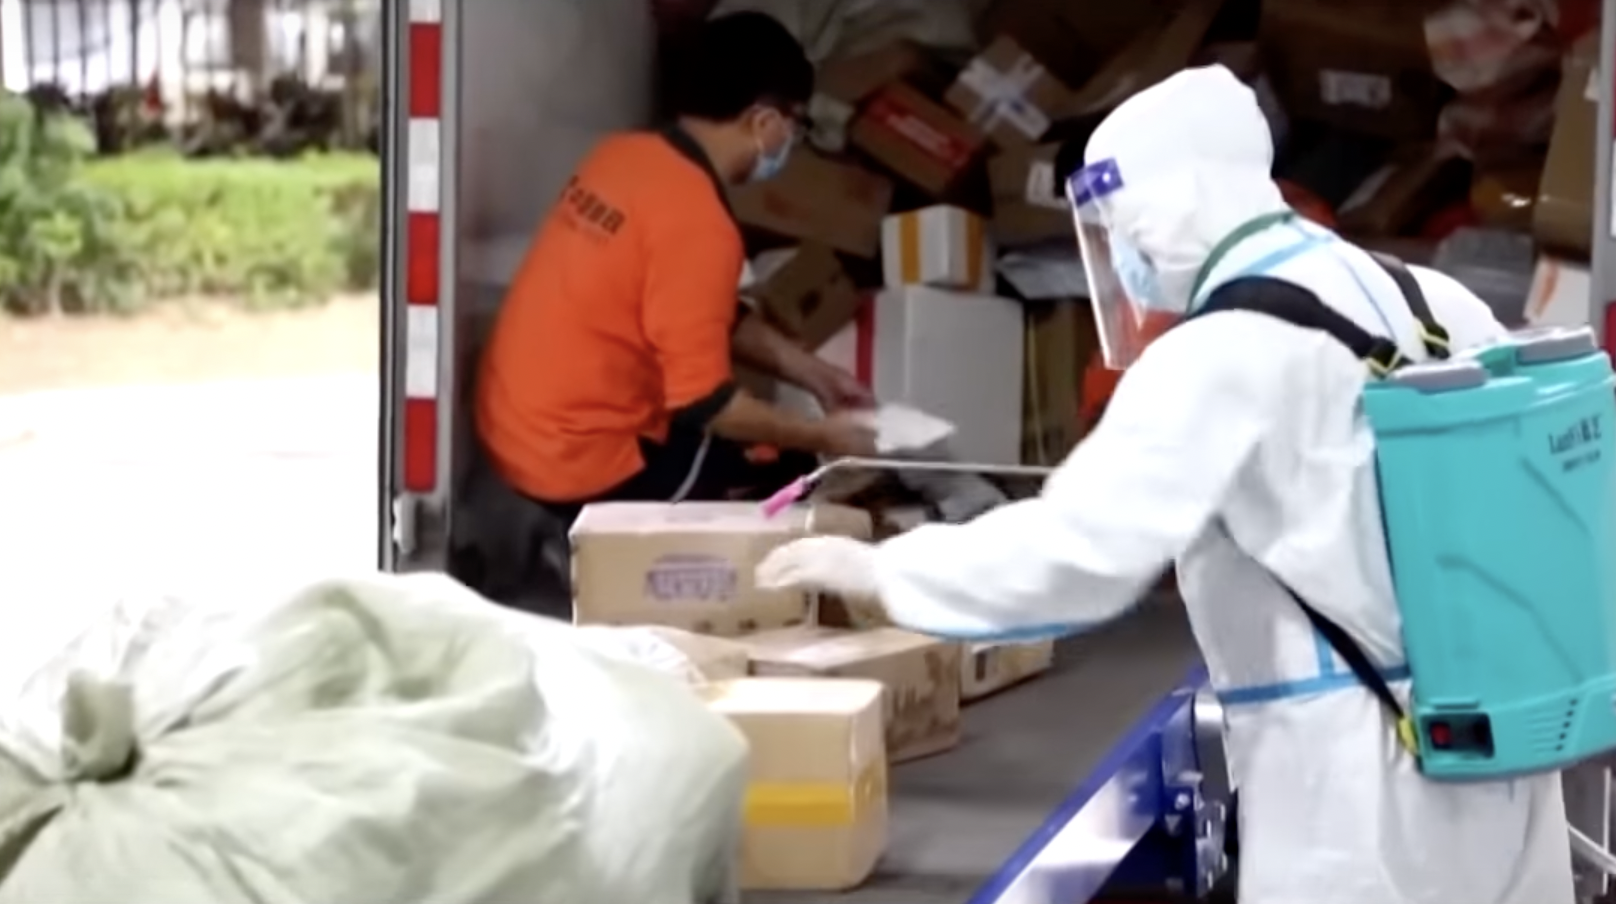 Under China's zero-COVID policy, international mail is disinfected before being distributed in China. Screenshot via <a href="https://www.youtube.com/watch?v=692_DHqblBc&amp;t=42s">YouTube</a>.